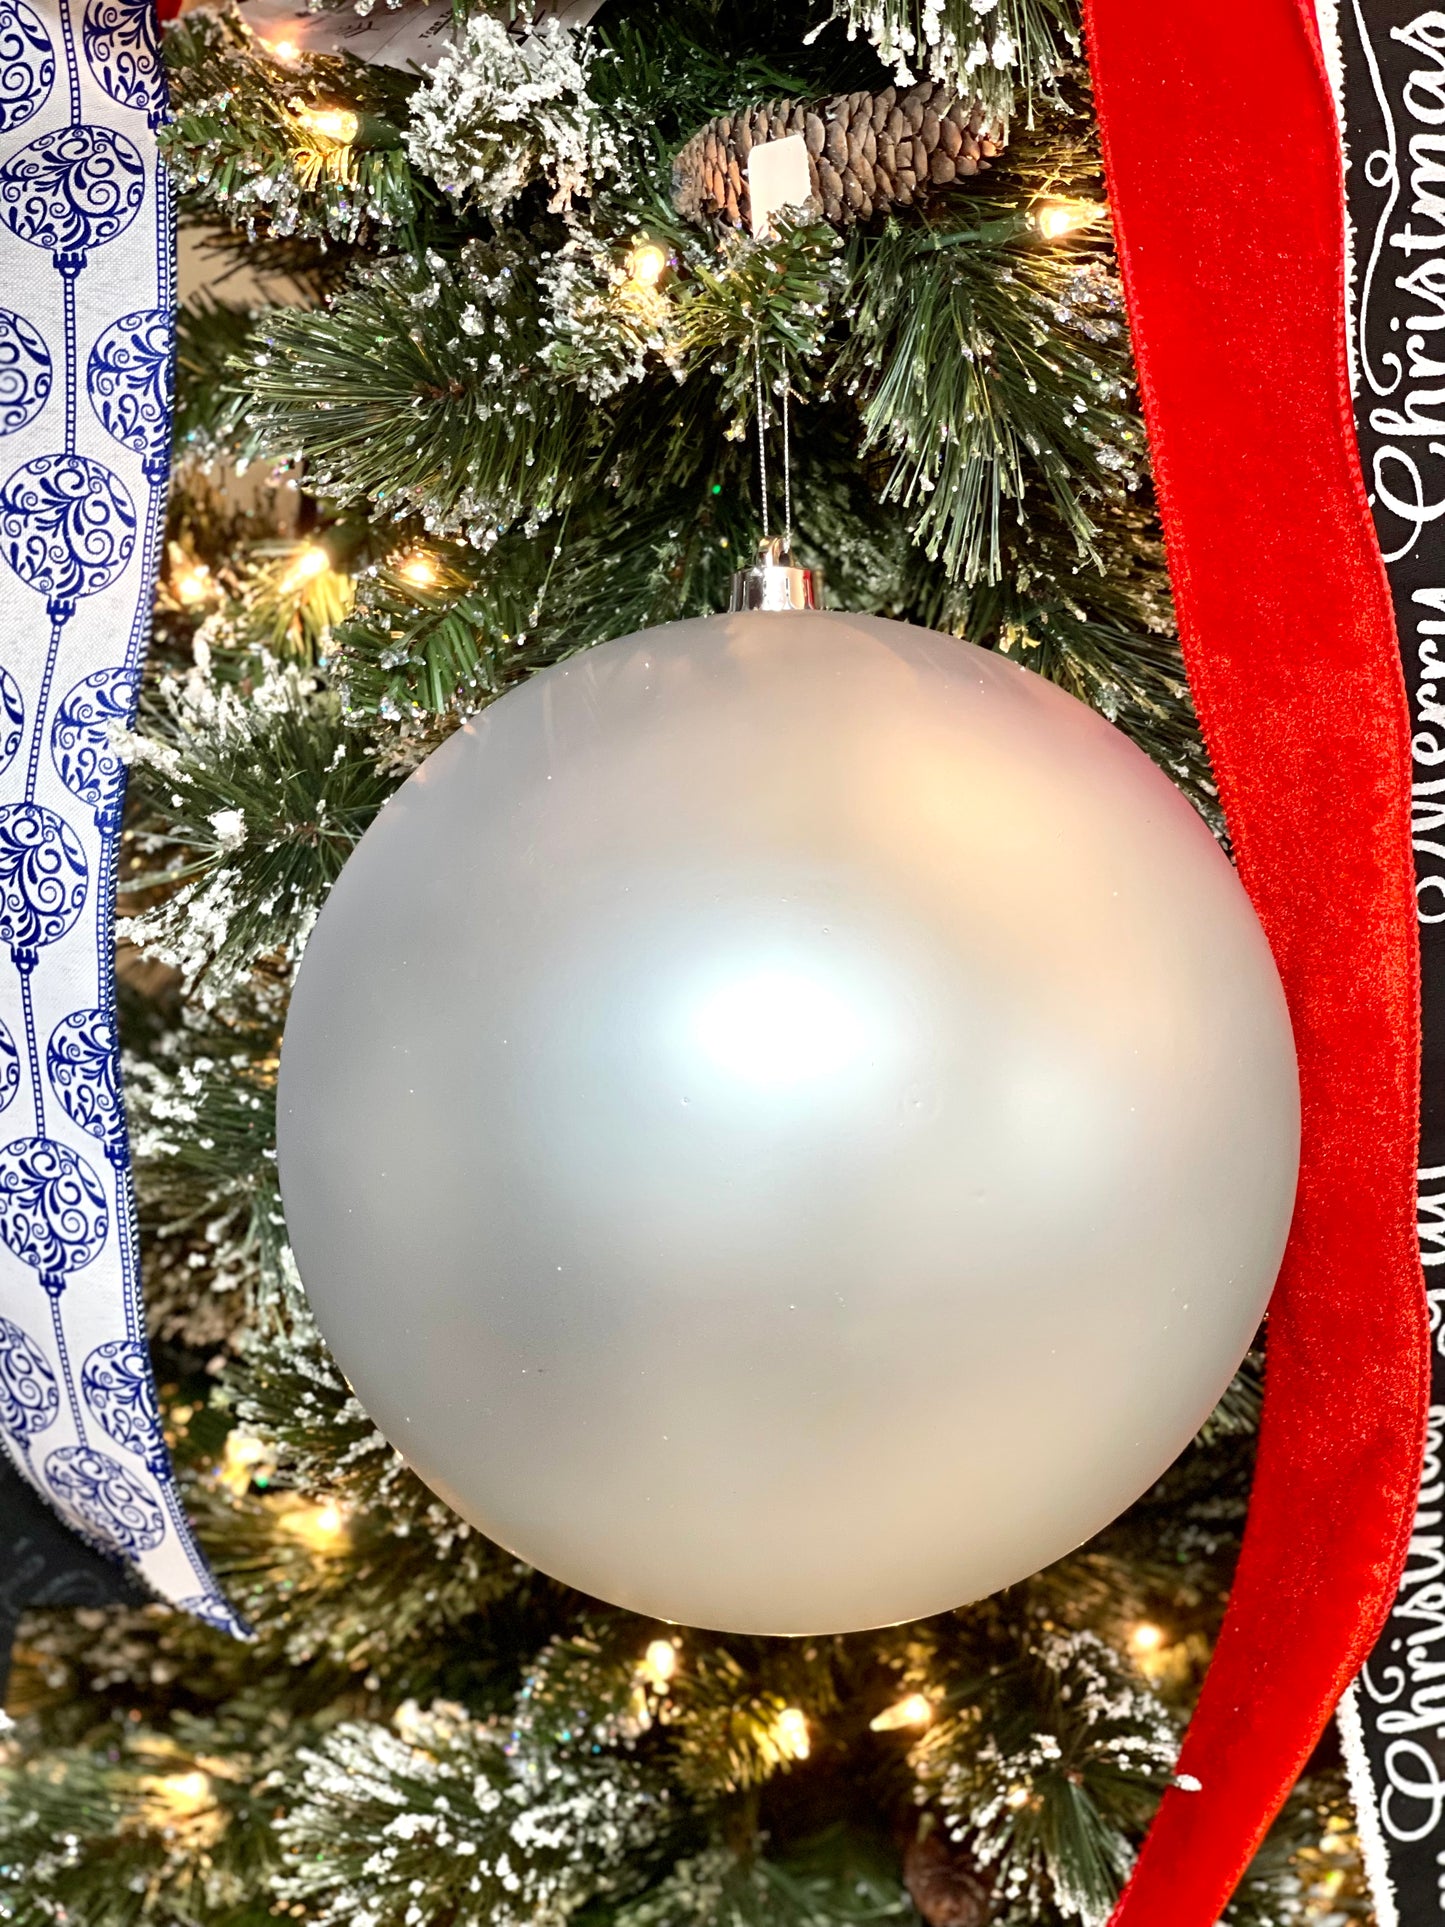 10 Inch Smooth Matte Silver Ornament Ball